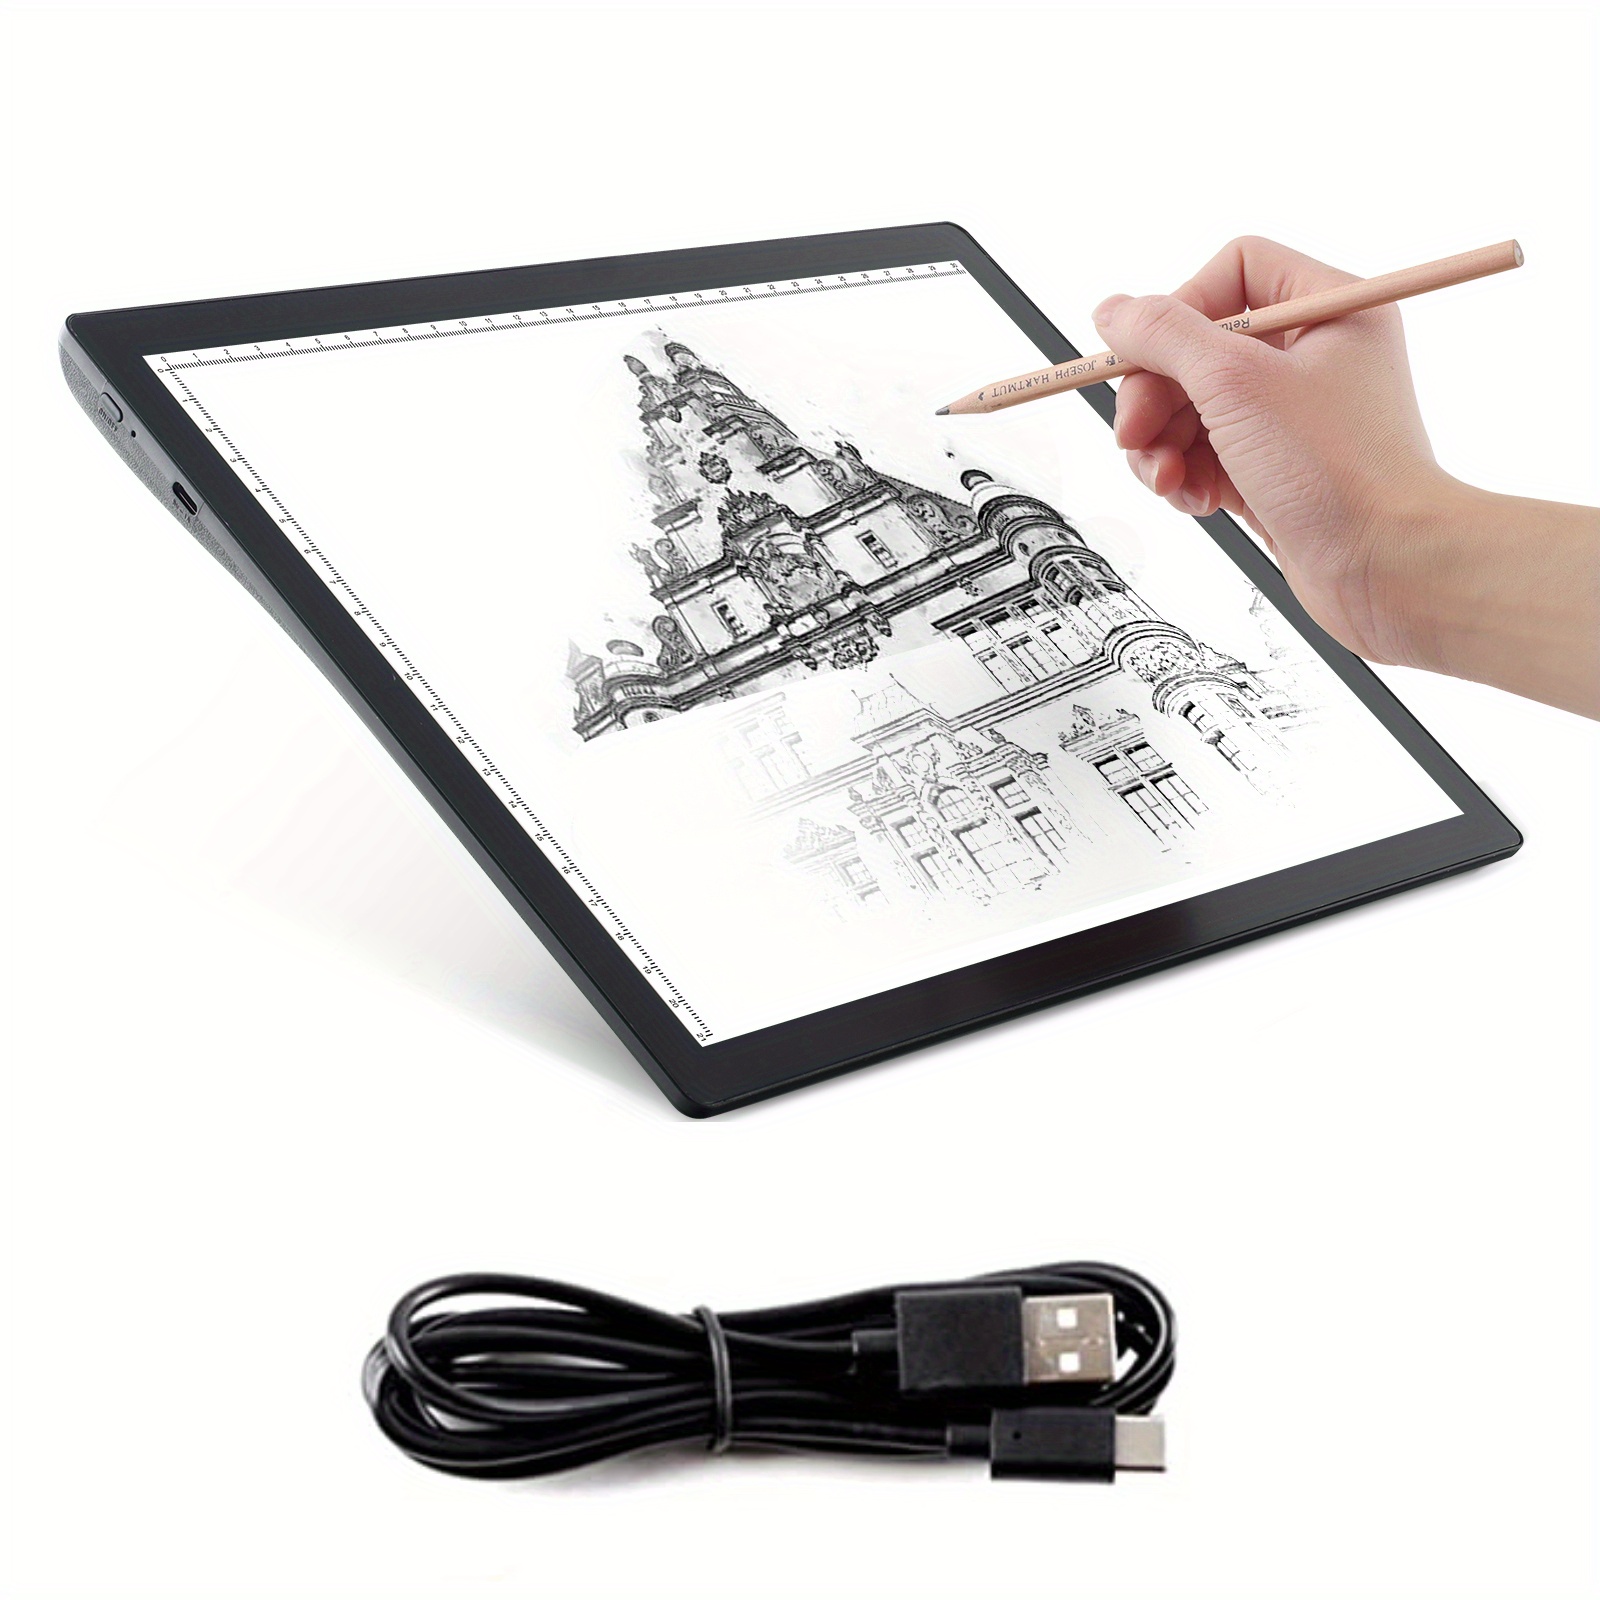 A4 Wireless LED Light Pad with Innovative Stand and Top Clip